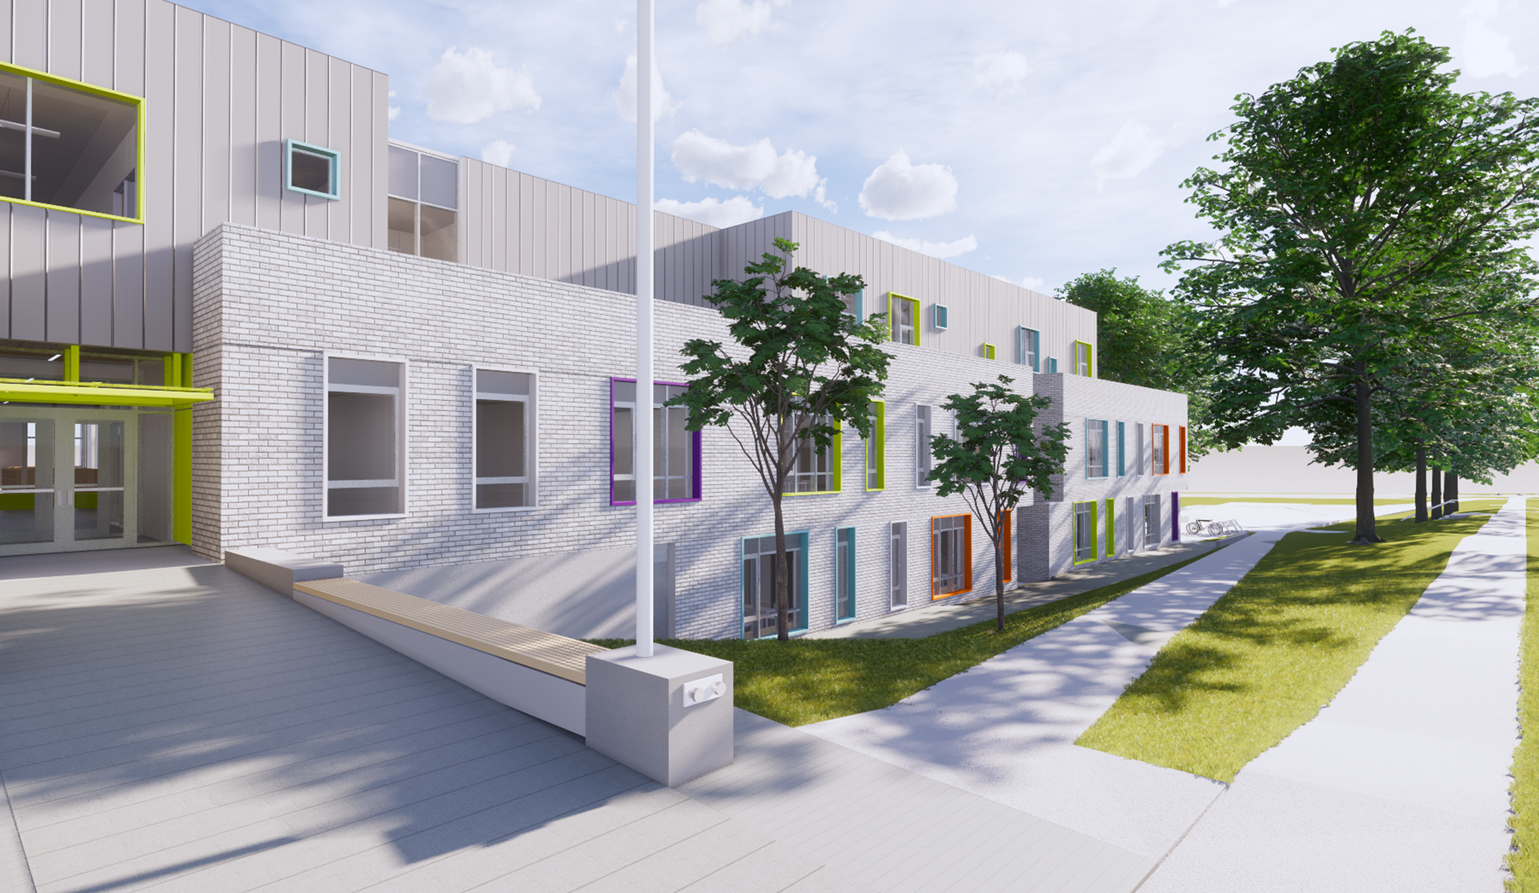 Rendering of David Lloyd George School from street view. The building is encased in clean, white brick, with colourful trim around each window and door.